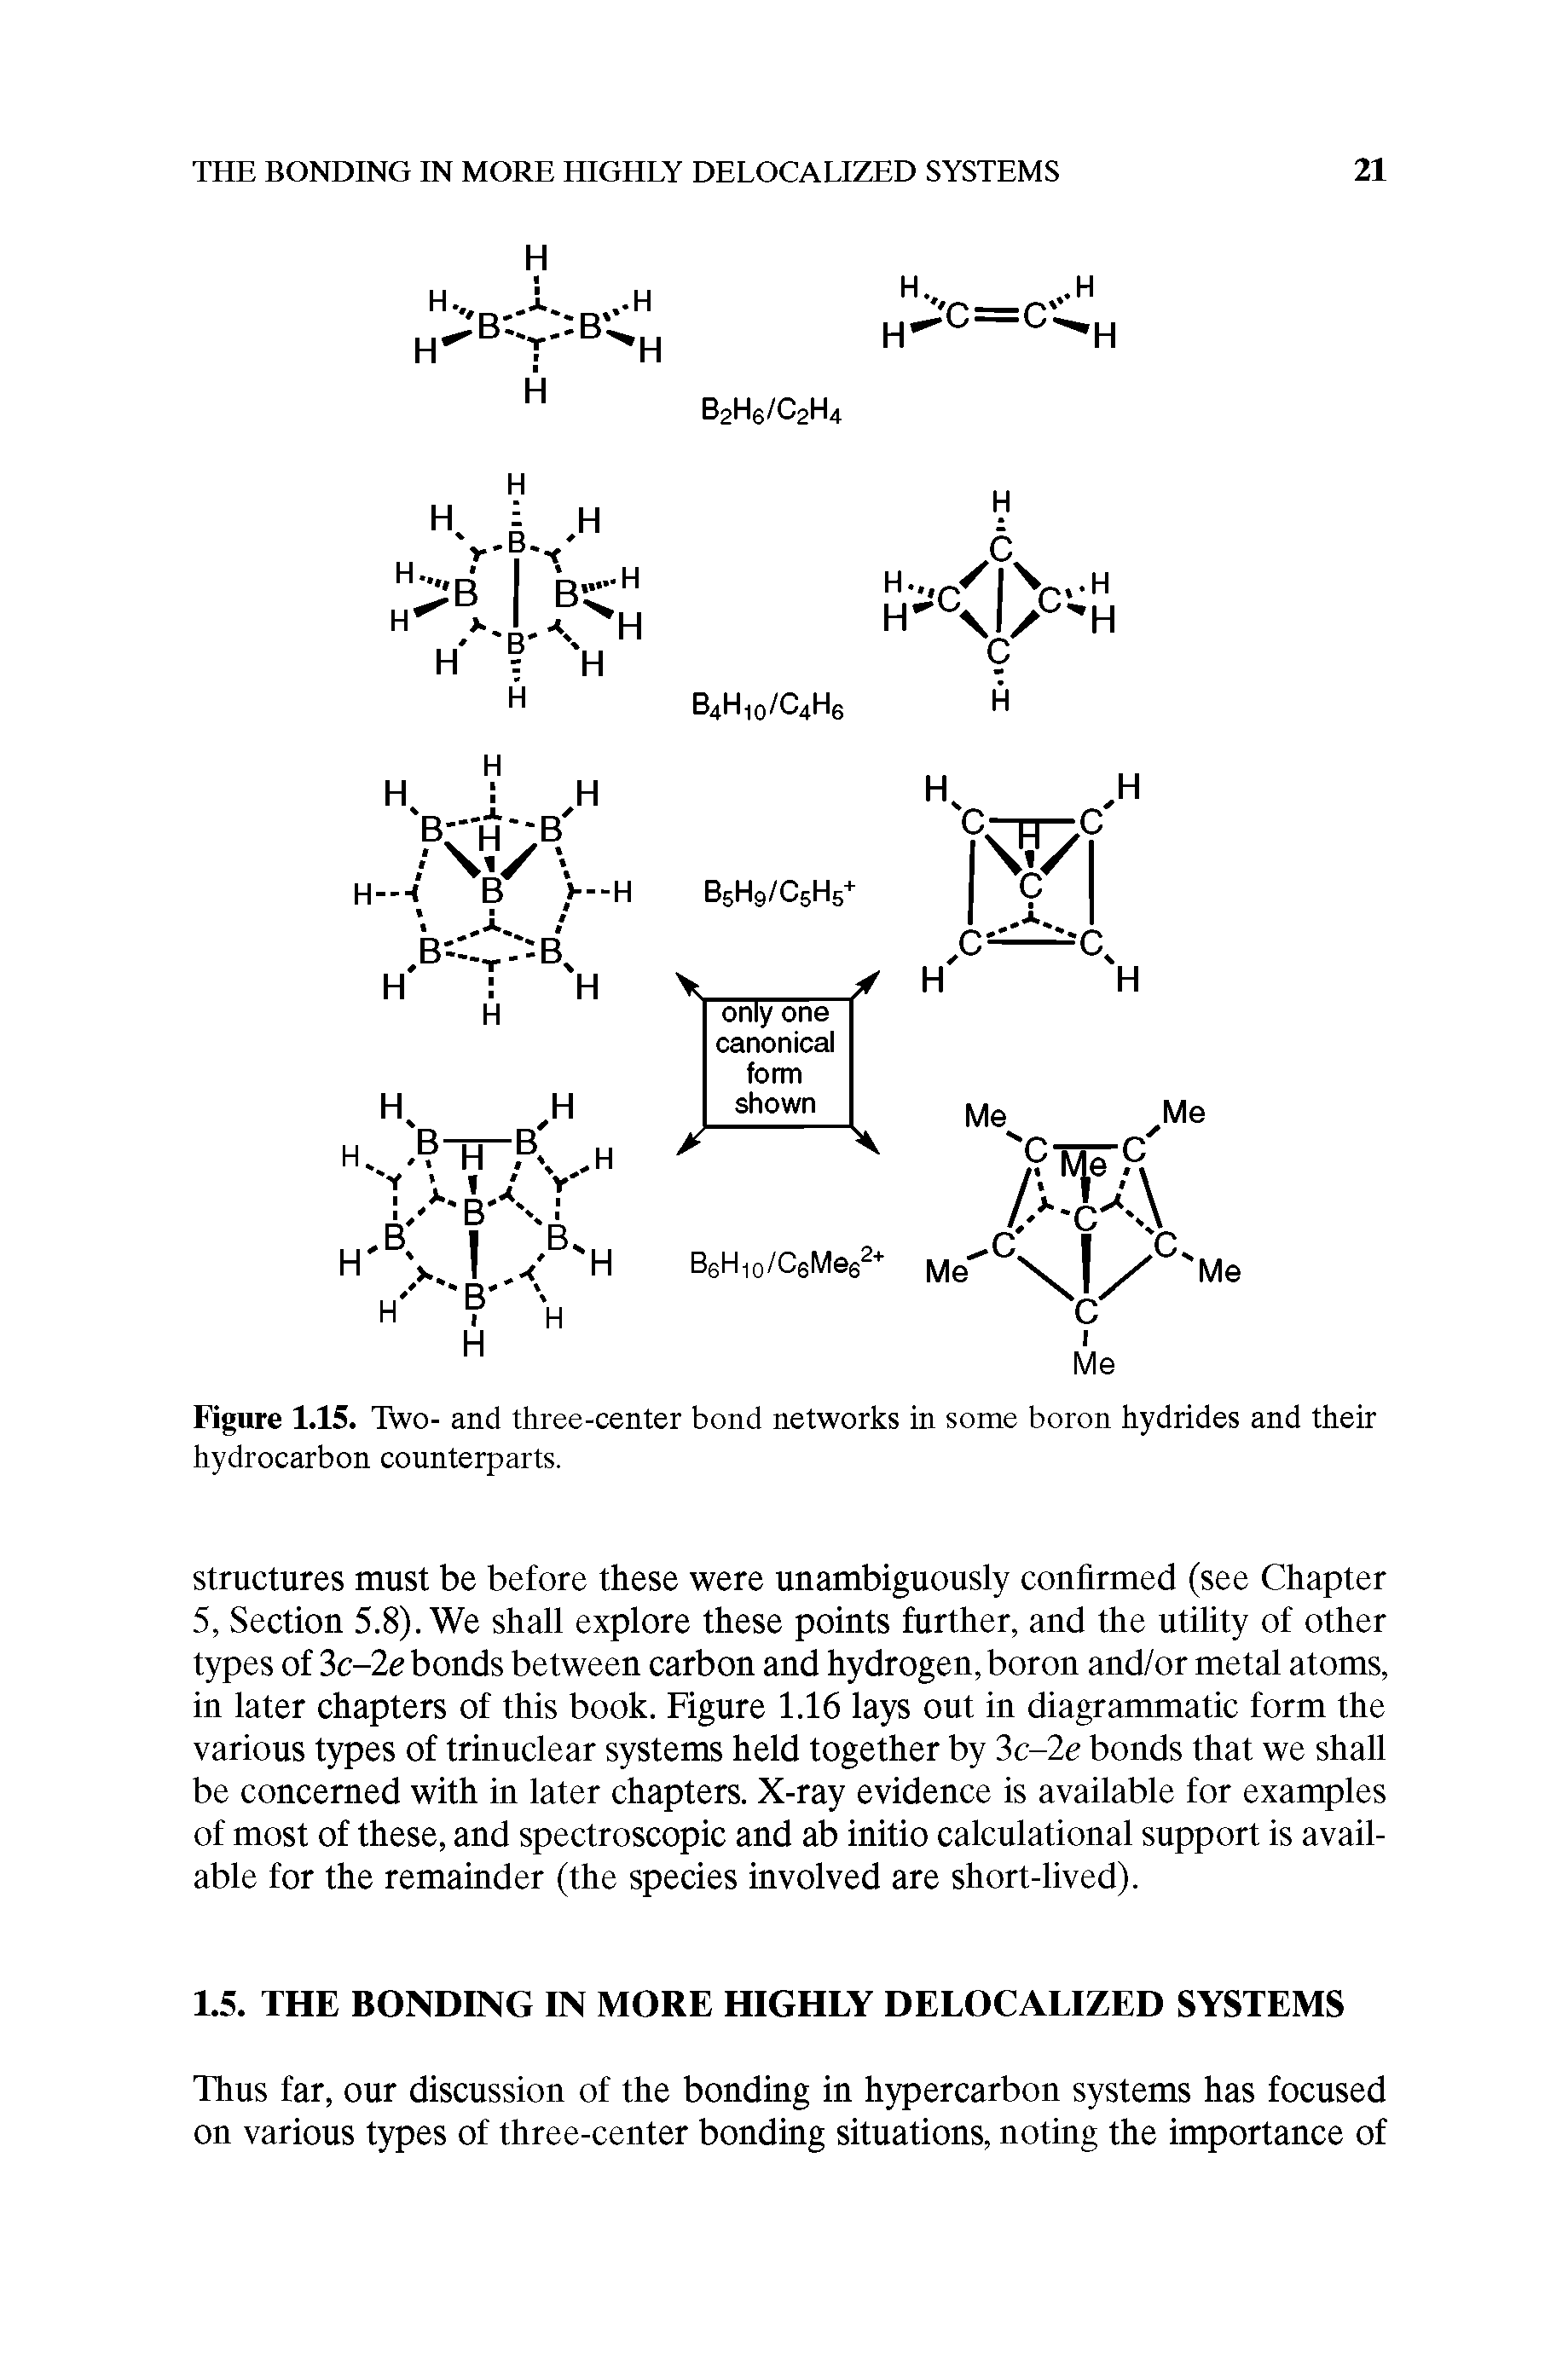 Figure 1.15. Two- and three-center bond networks in some boron hydrides and their hydrocarbon counterparts.